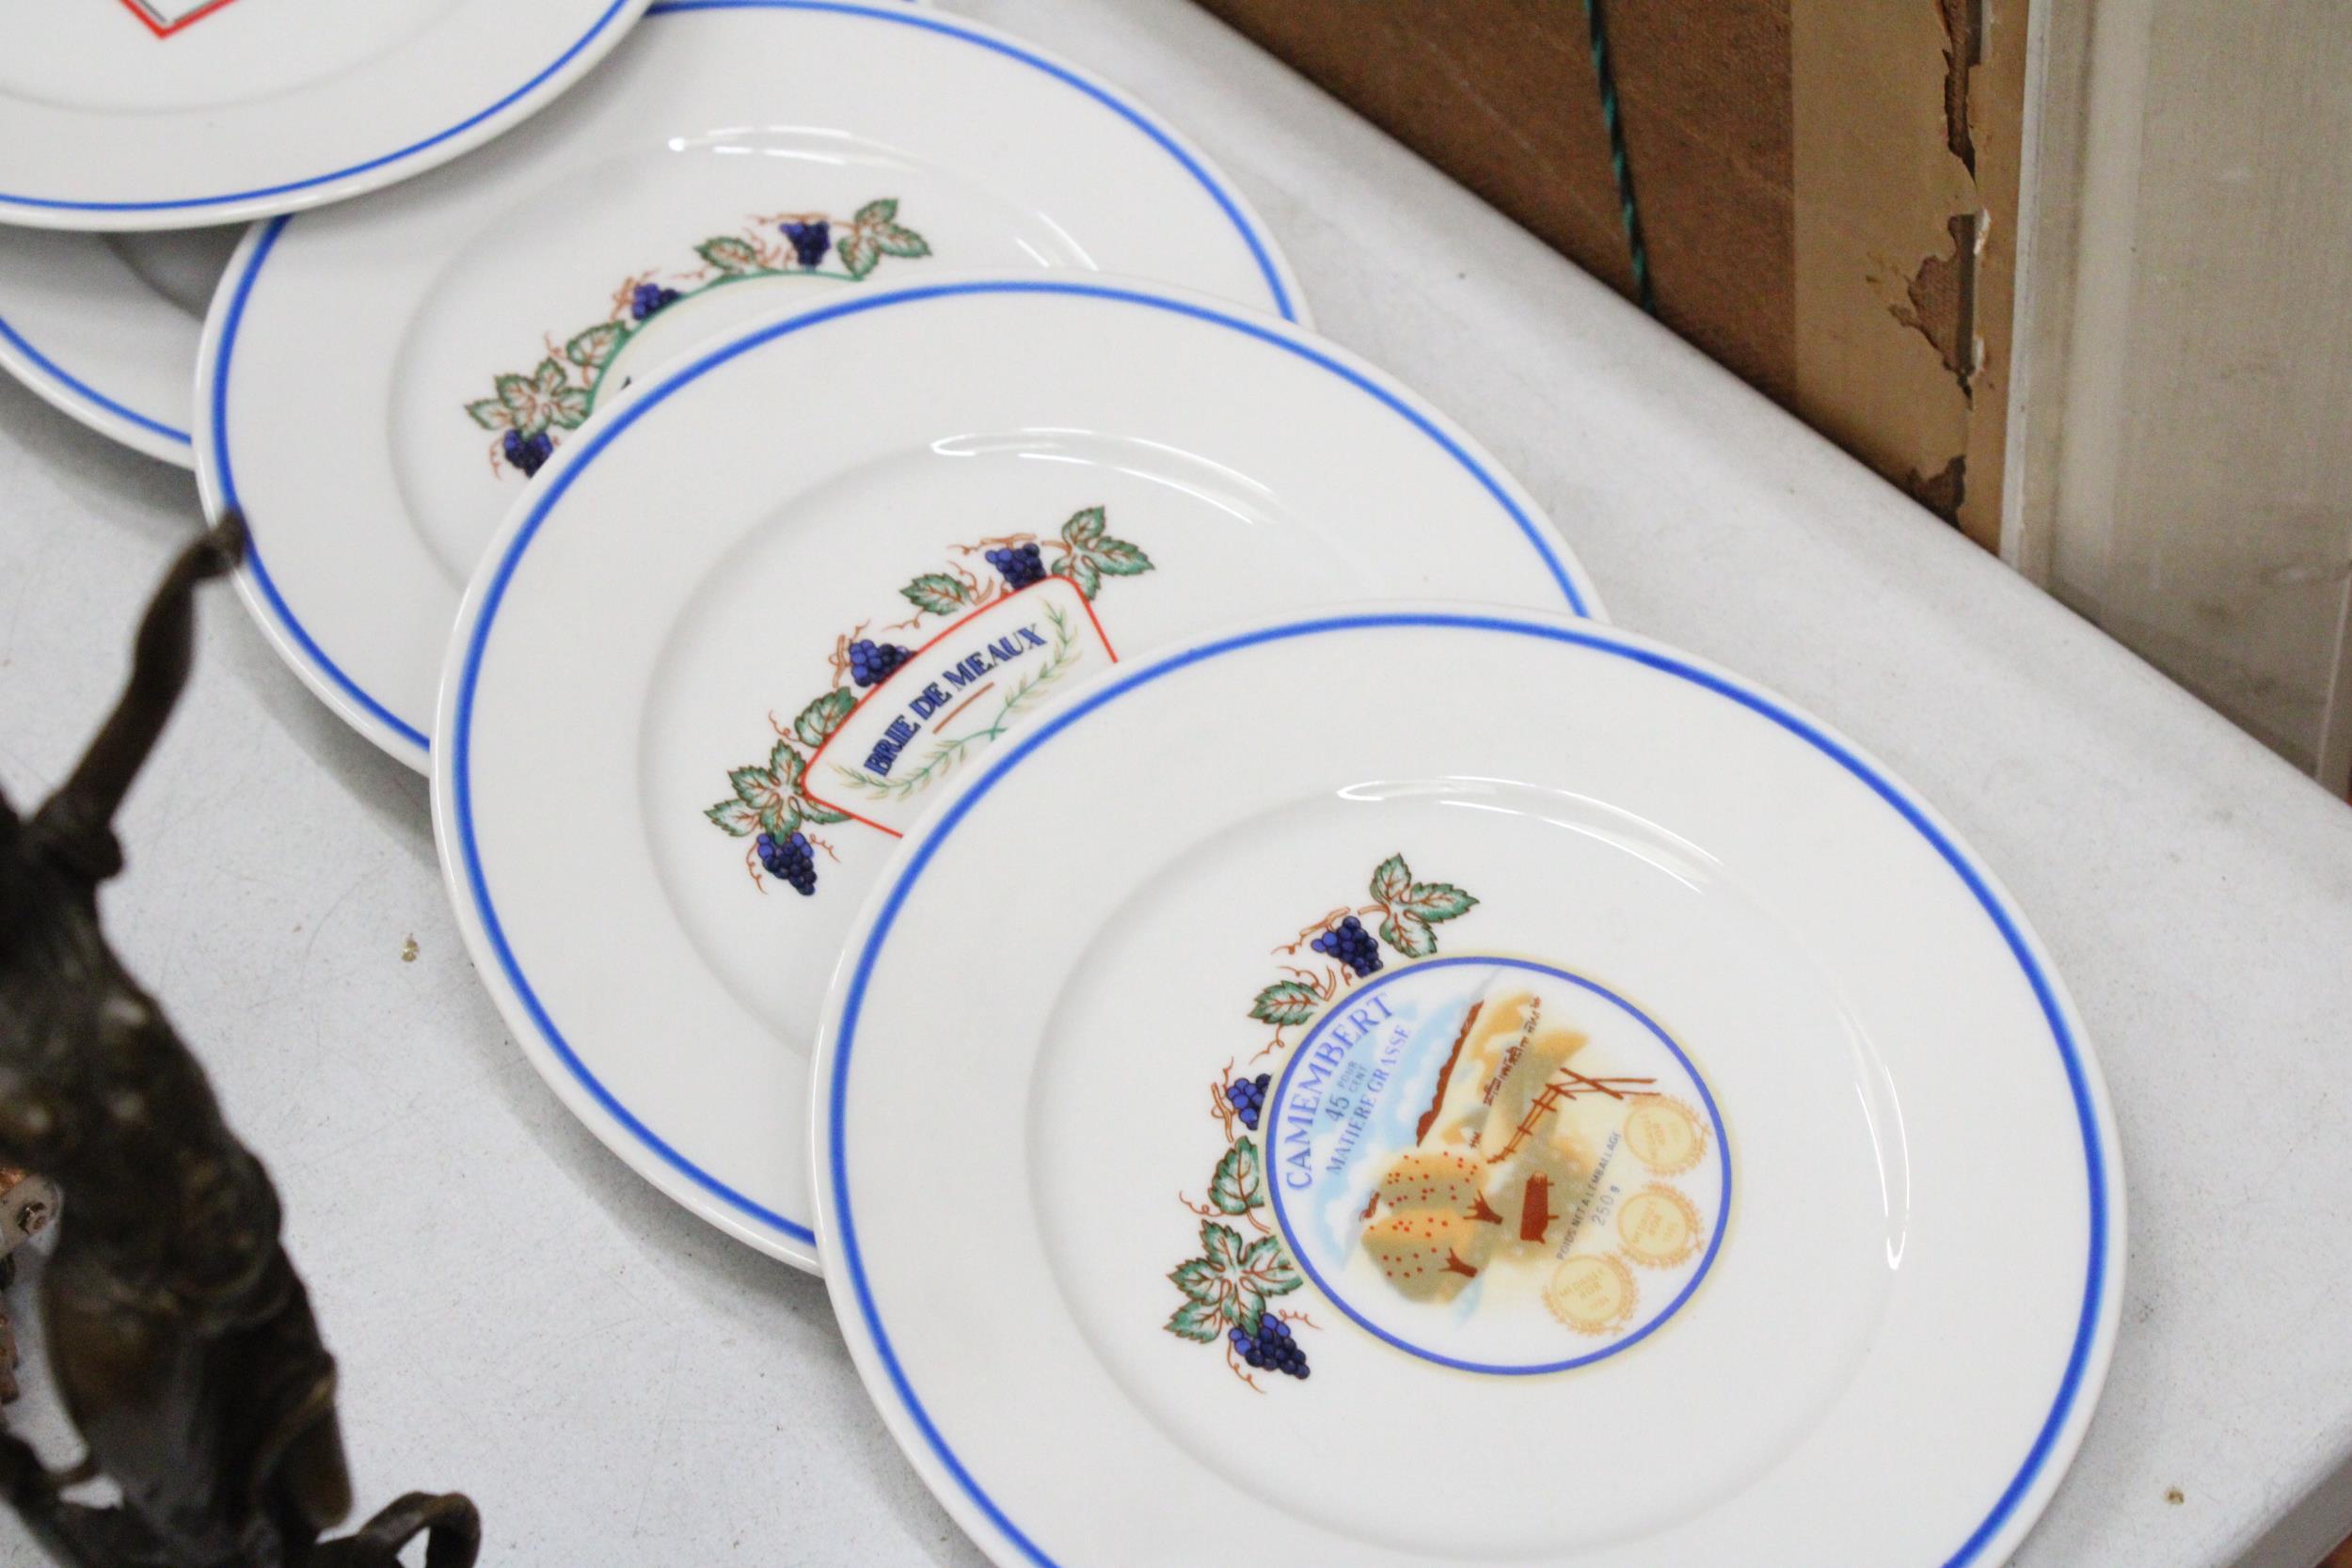 SIX FRENCH CHEESE PLATES PLUS A ANGLO/FRENCH CERAMIC CHEESEBOARD - Image 6 of 6